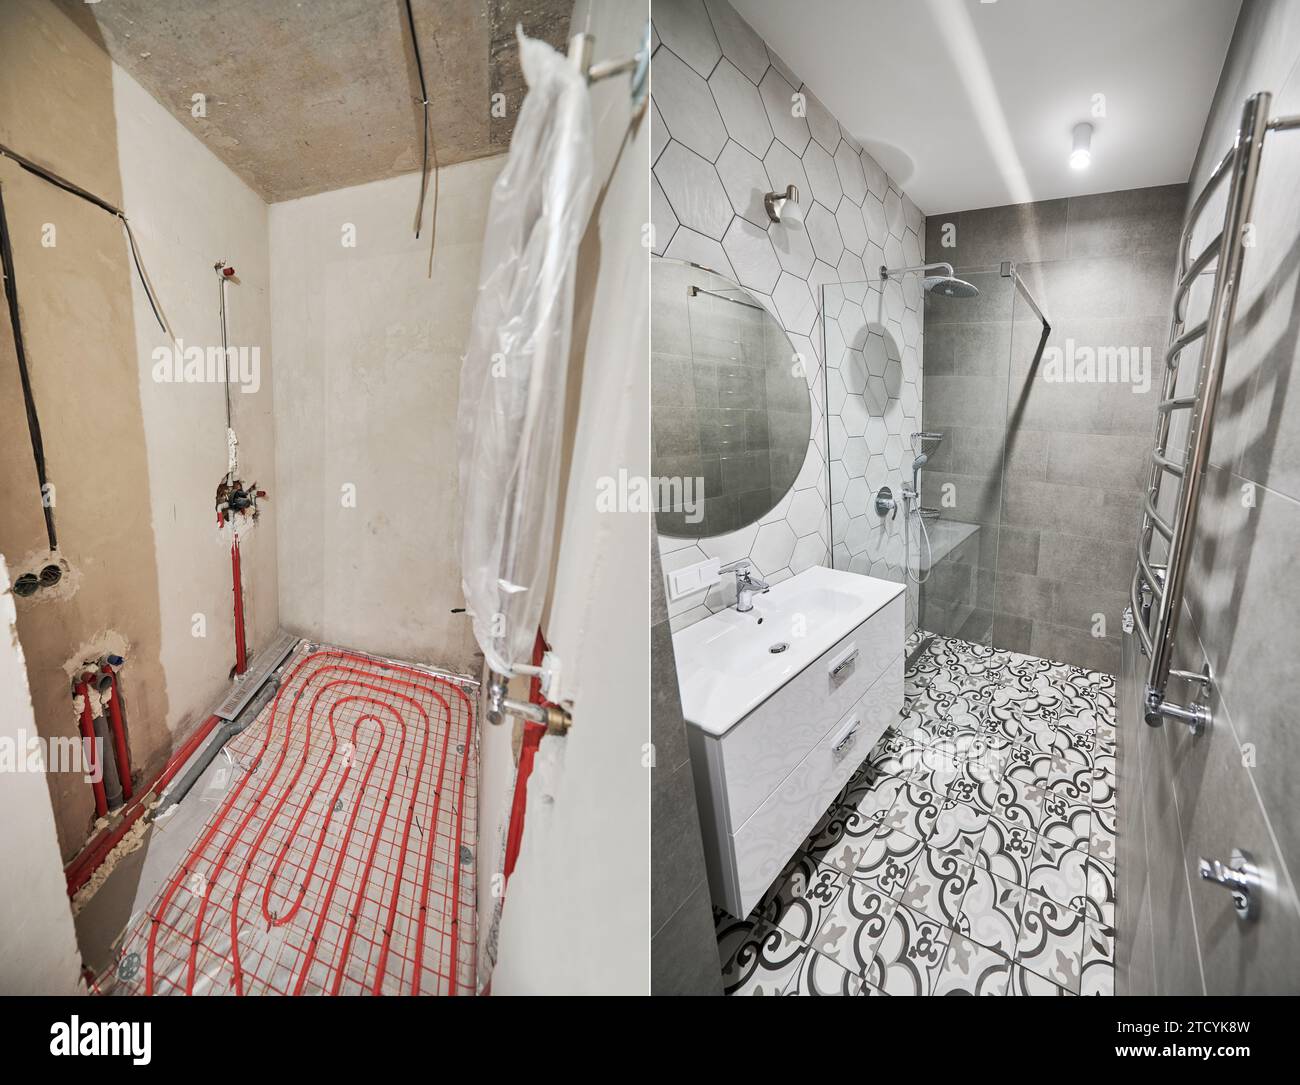 Photo collage of apartment bathroom before and after restoration. Comparison of old room with underfloor heating pipes and new renovated restroom with sink, shower, mirror and towel dryer. Stock Photo